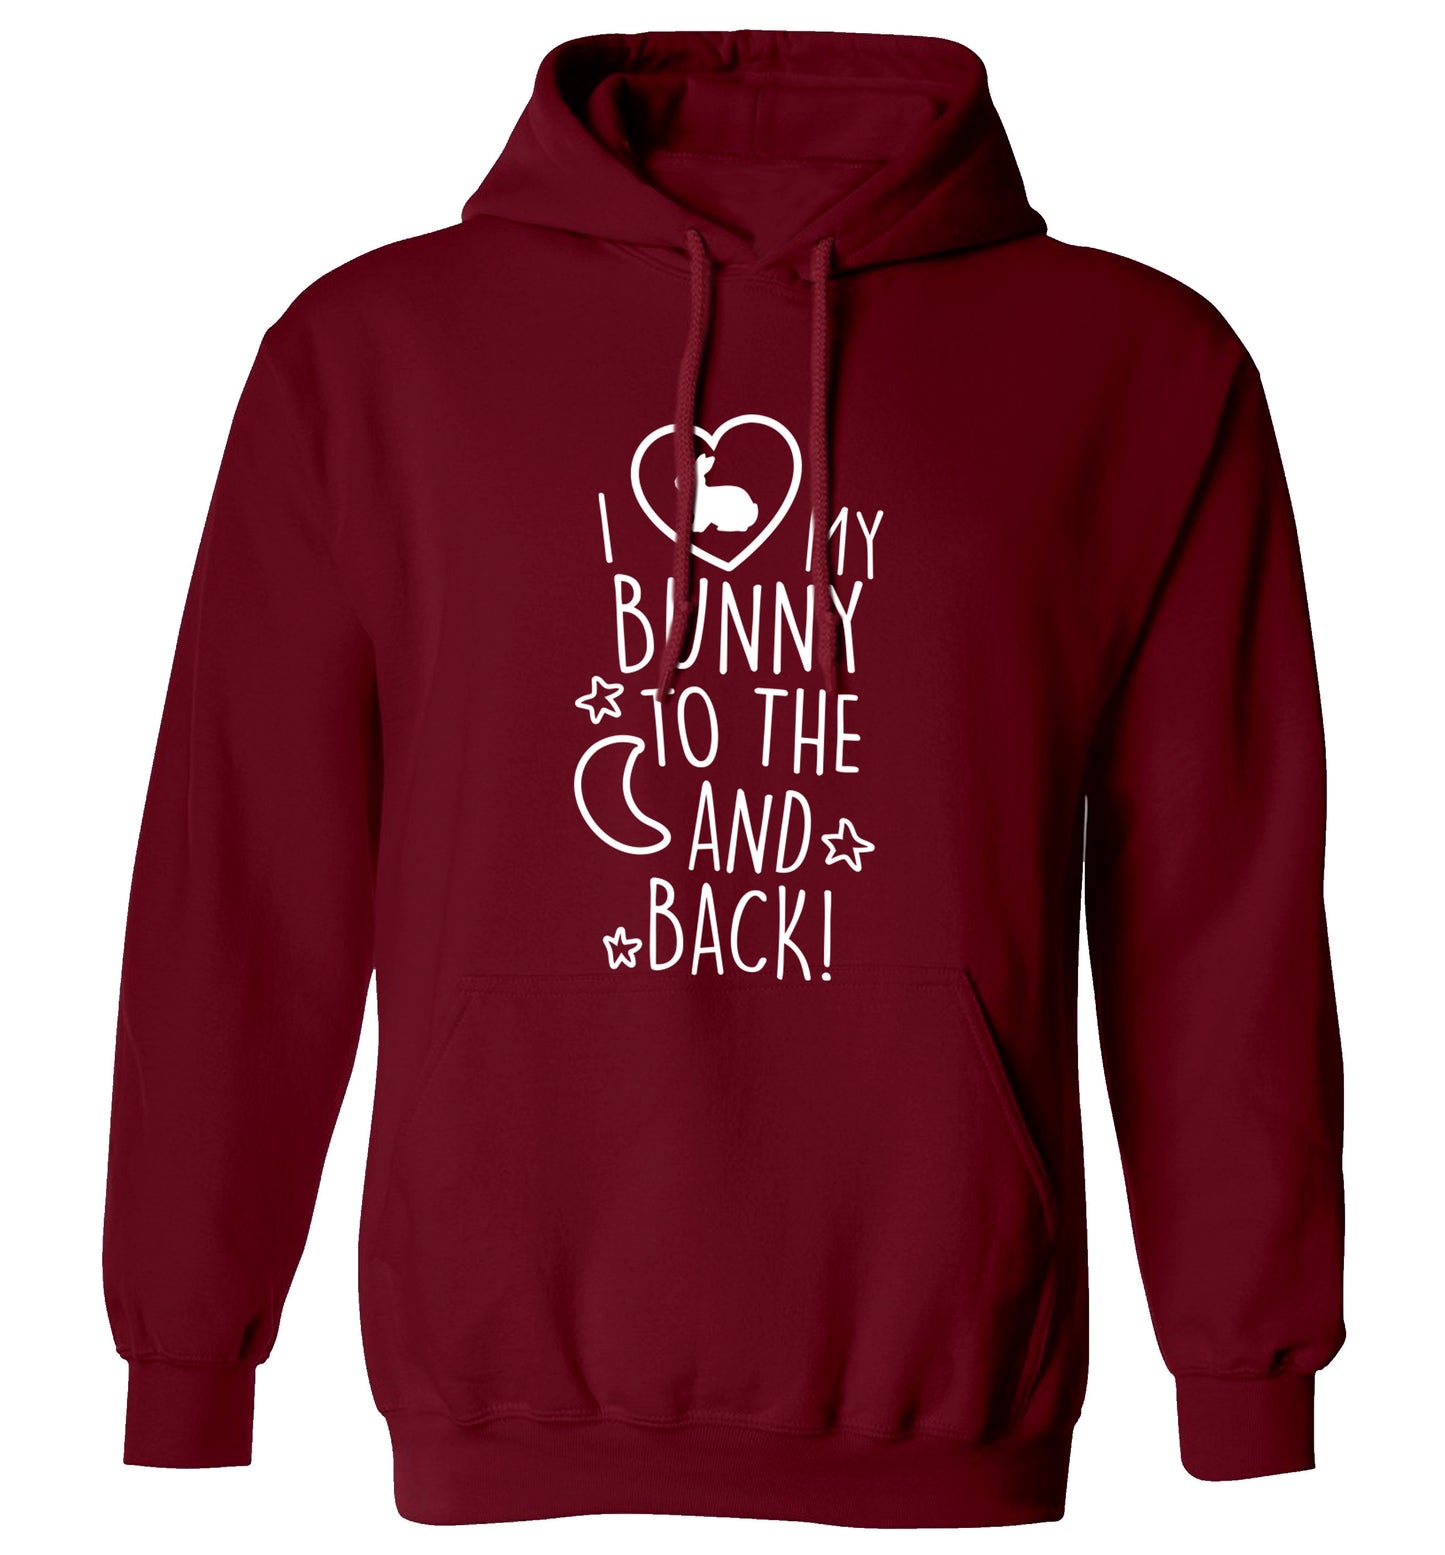 I love my bunny to the moon and back adults unisex maroon hoodie 2XL